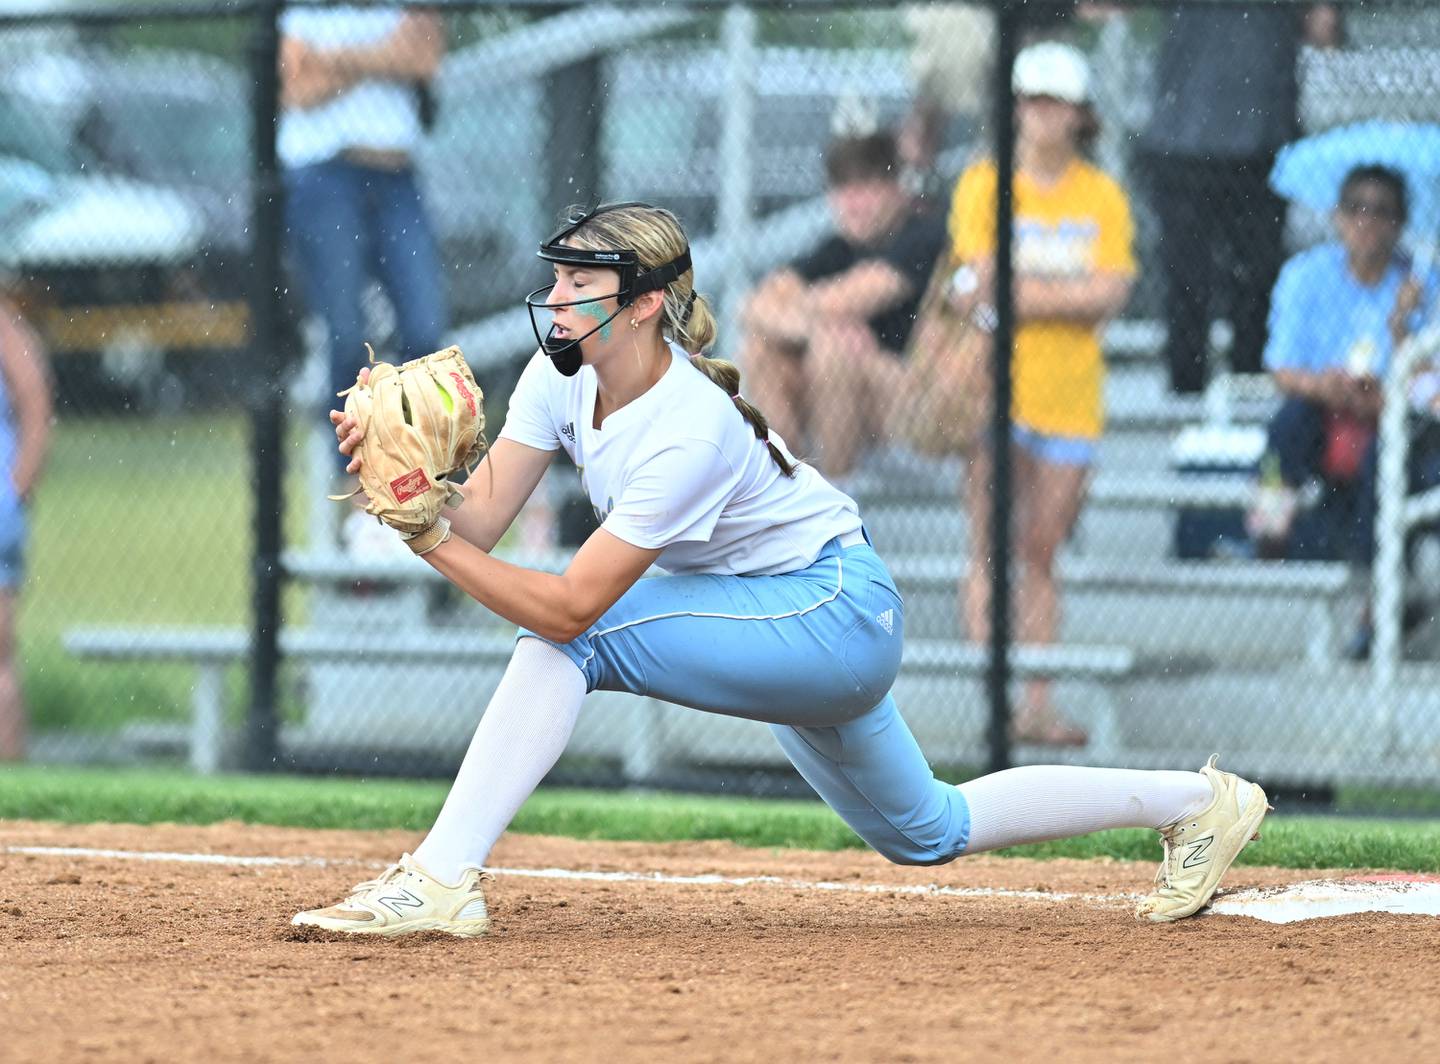 Joliet Catholic's first basemen in action during the Lemont Class 3A sectional semifinal game against Lemont on Wednesday, May. 31, 2023, at Lemont.